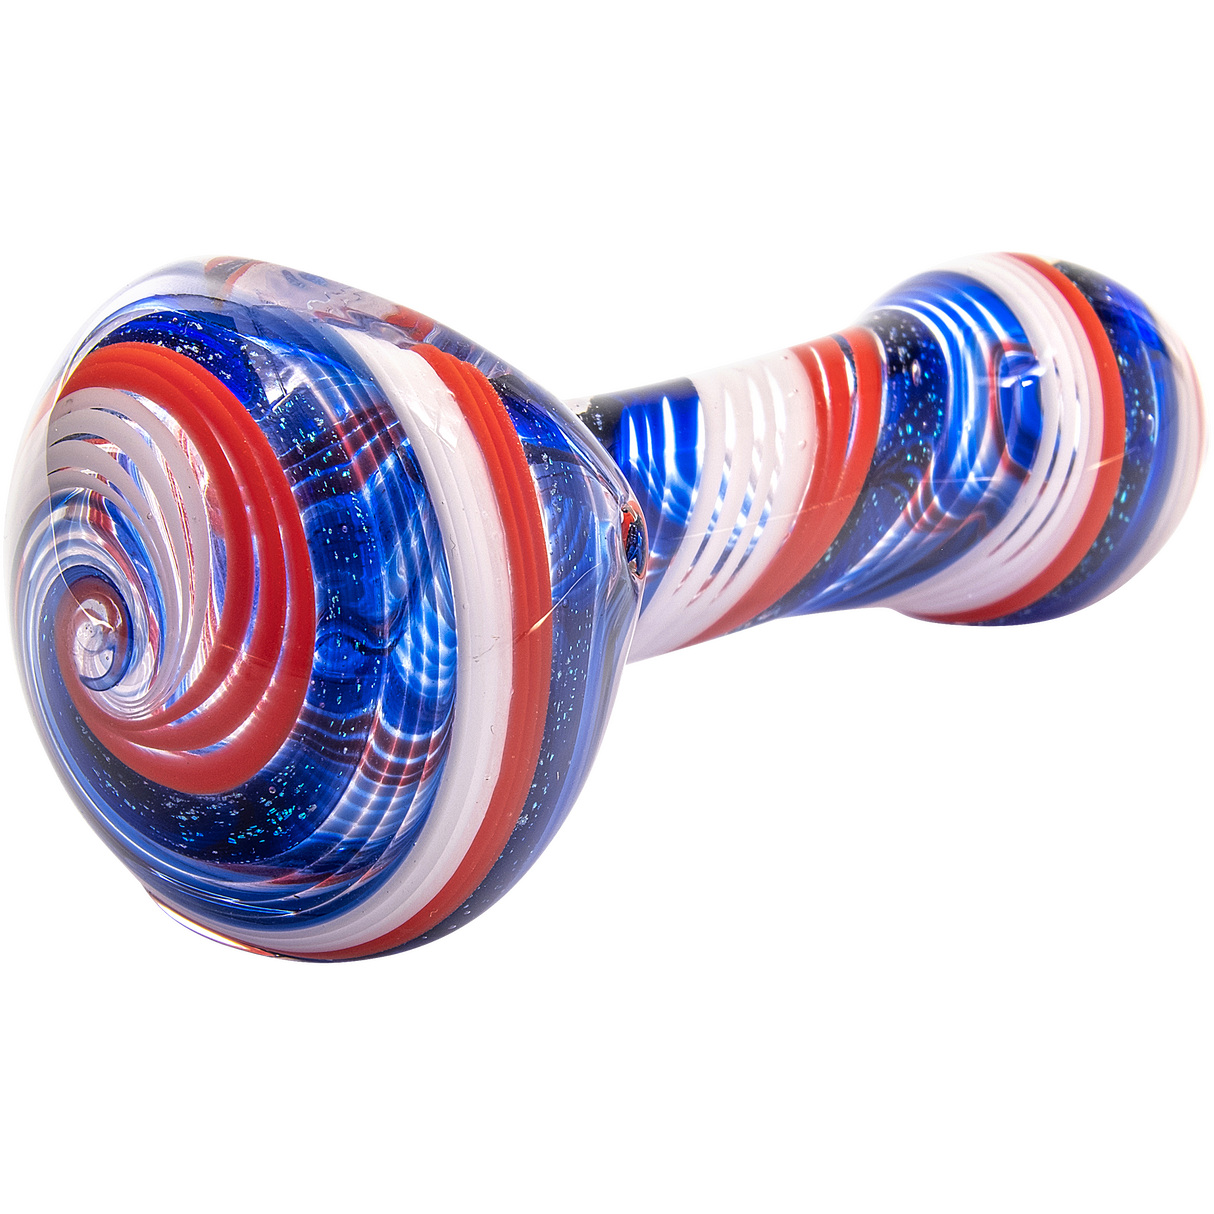 LA Pipes compact borosilicate glass spoon pipe with stars and stripes design, side view